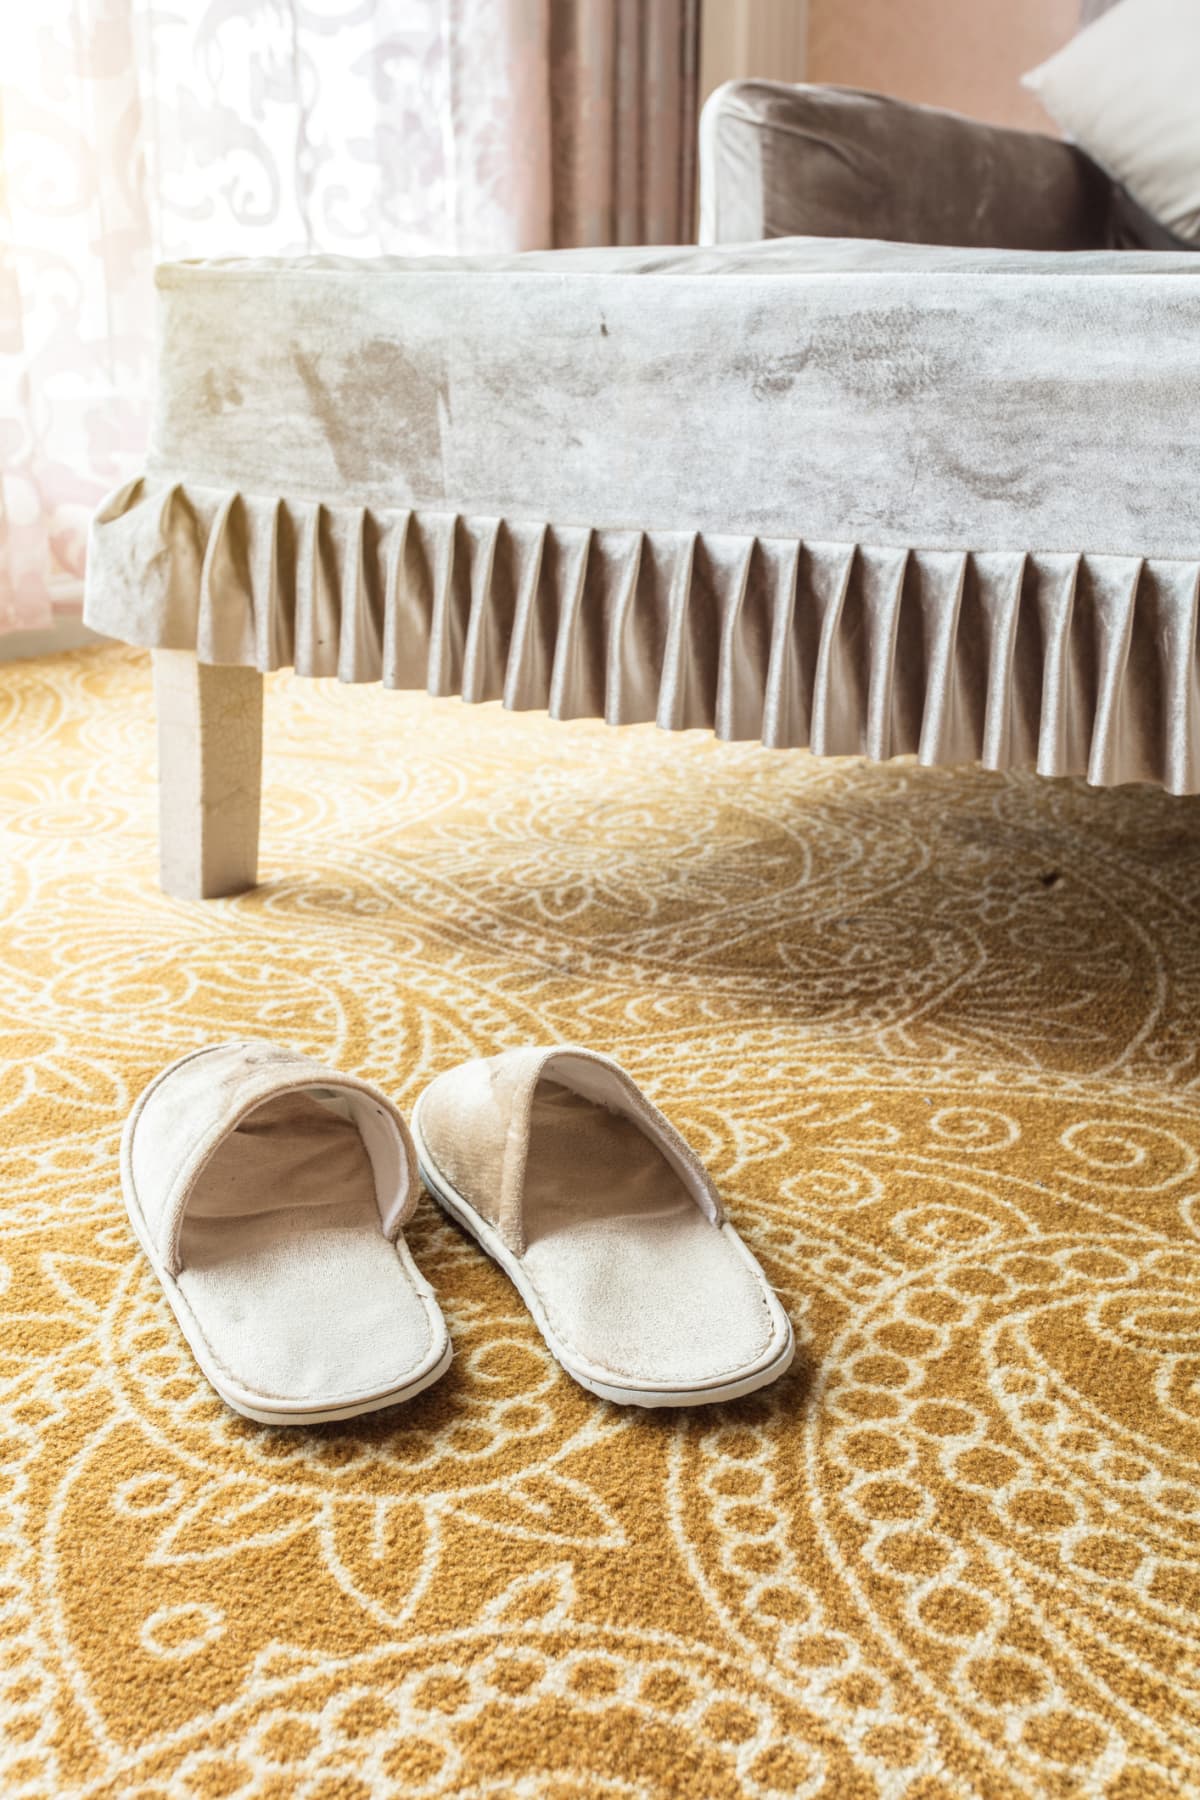 Cotton slippers on carpet